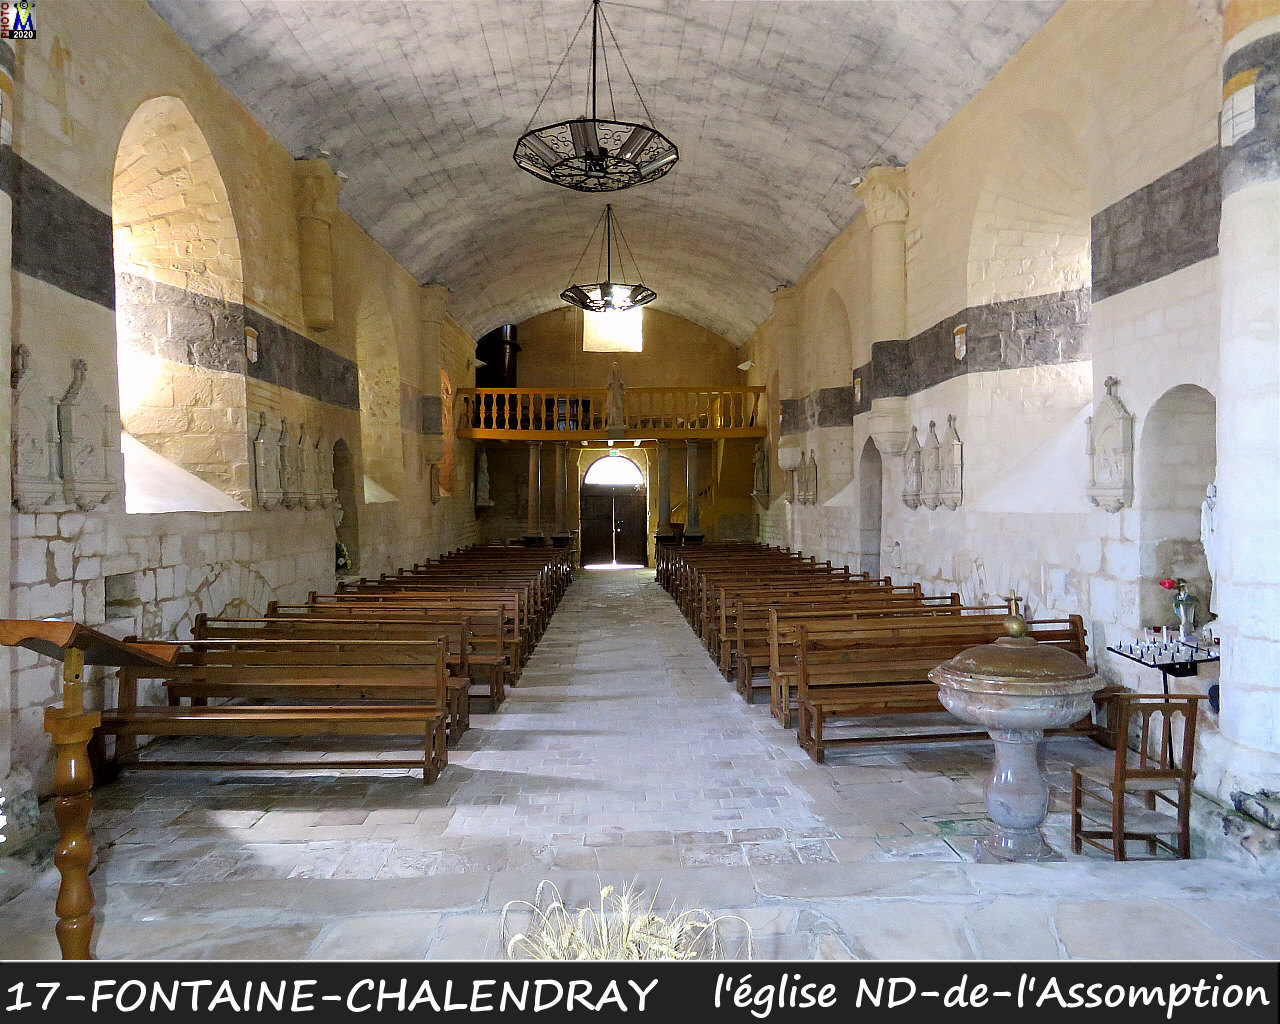 17FONTAINE-CHALENDRAY_eglise_1102.jpg